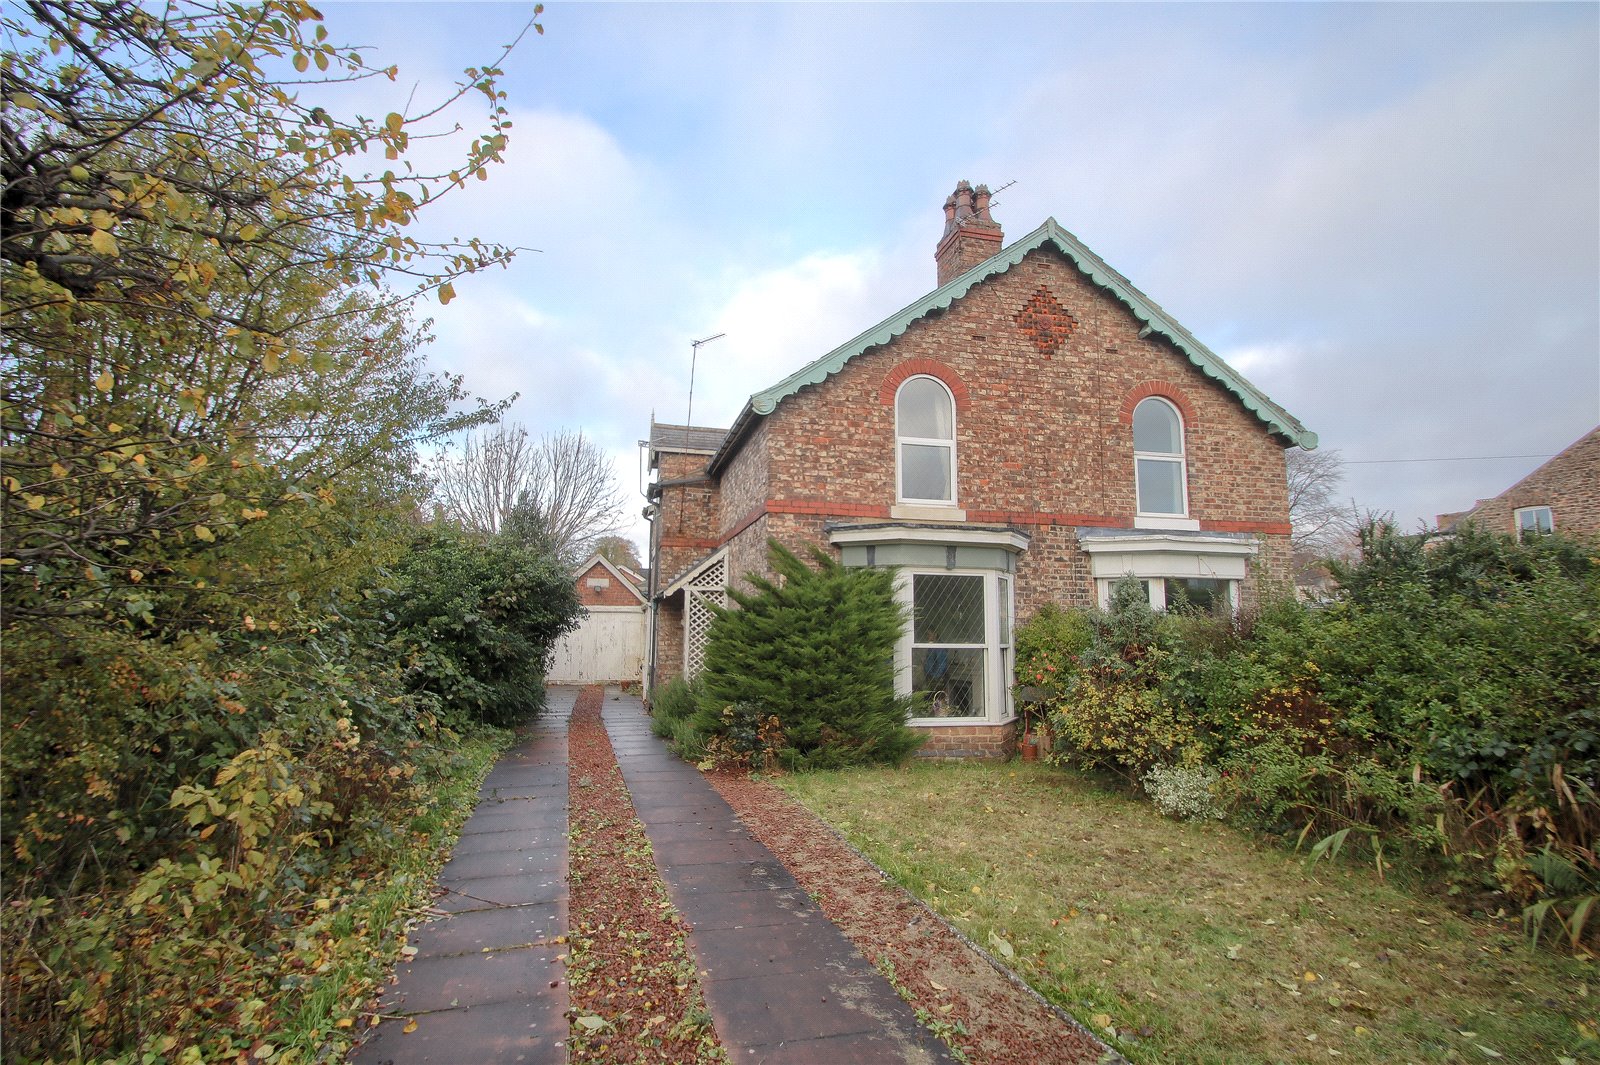 3 bed house for sale in Newsam Road, Eaglescliffe - Property Image 1